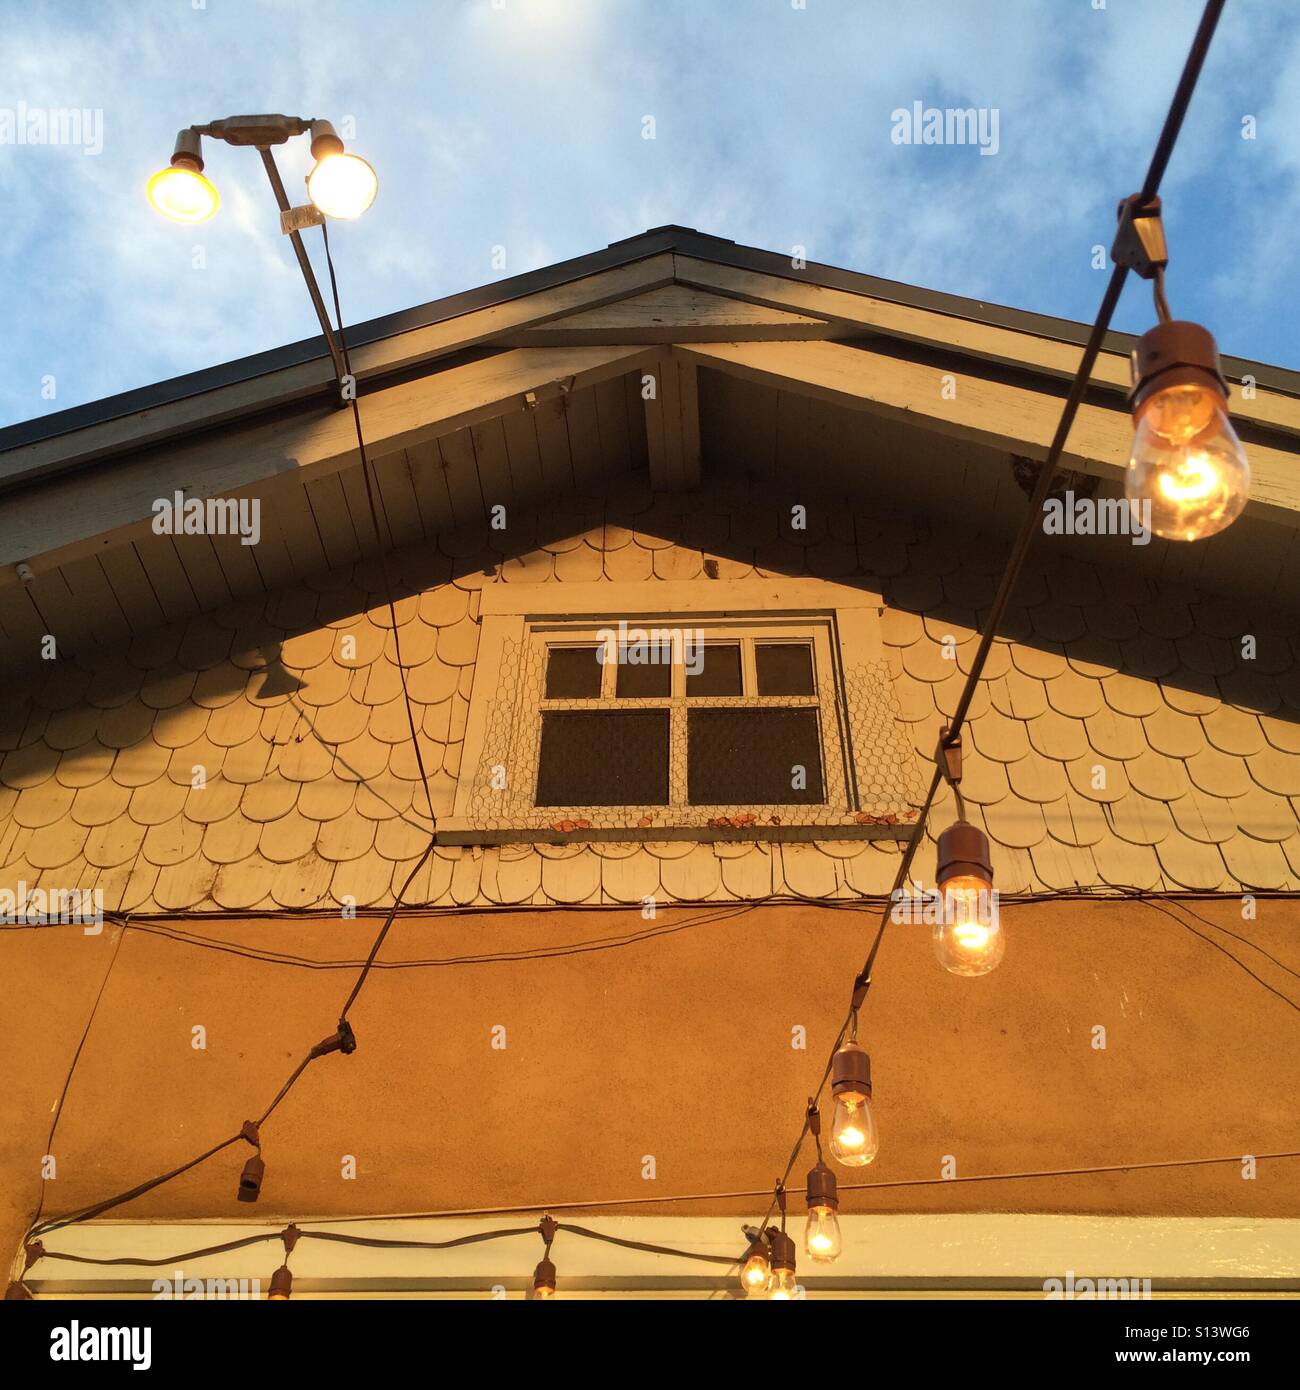 Evening decorative lights stand in front of an old building. Stock Photo